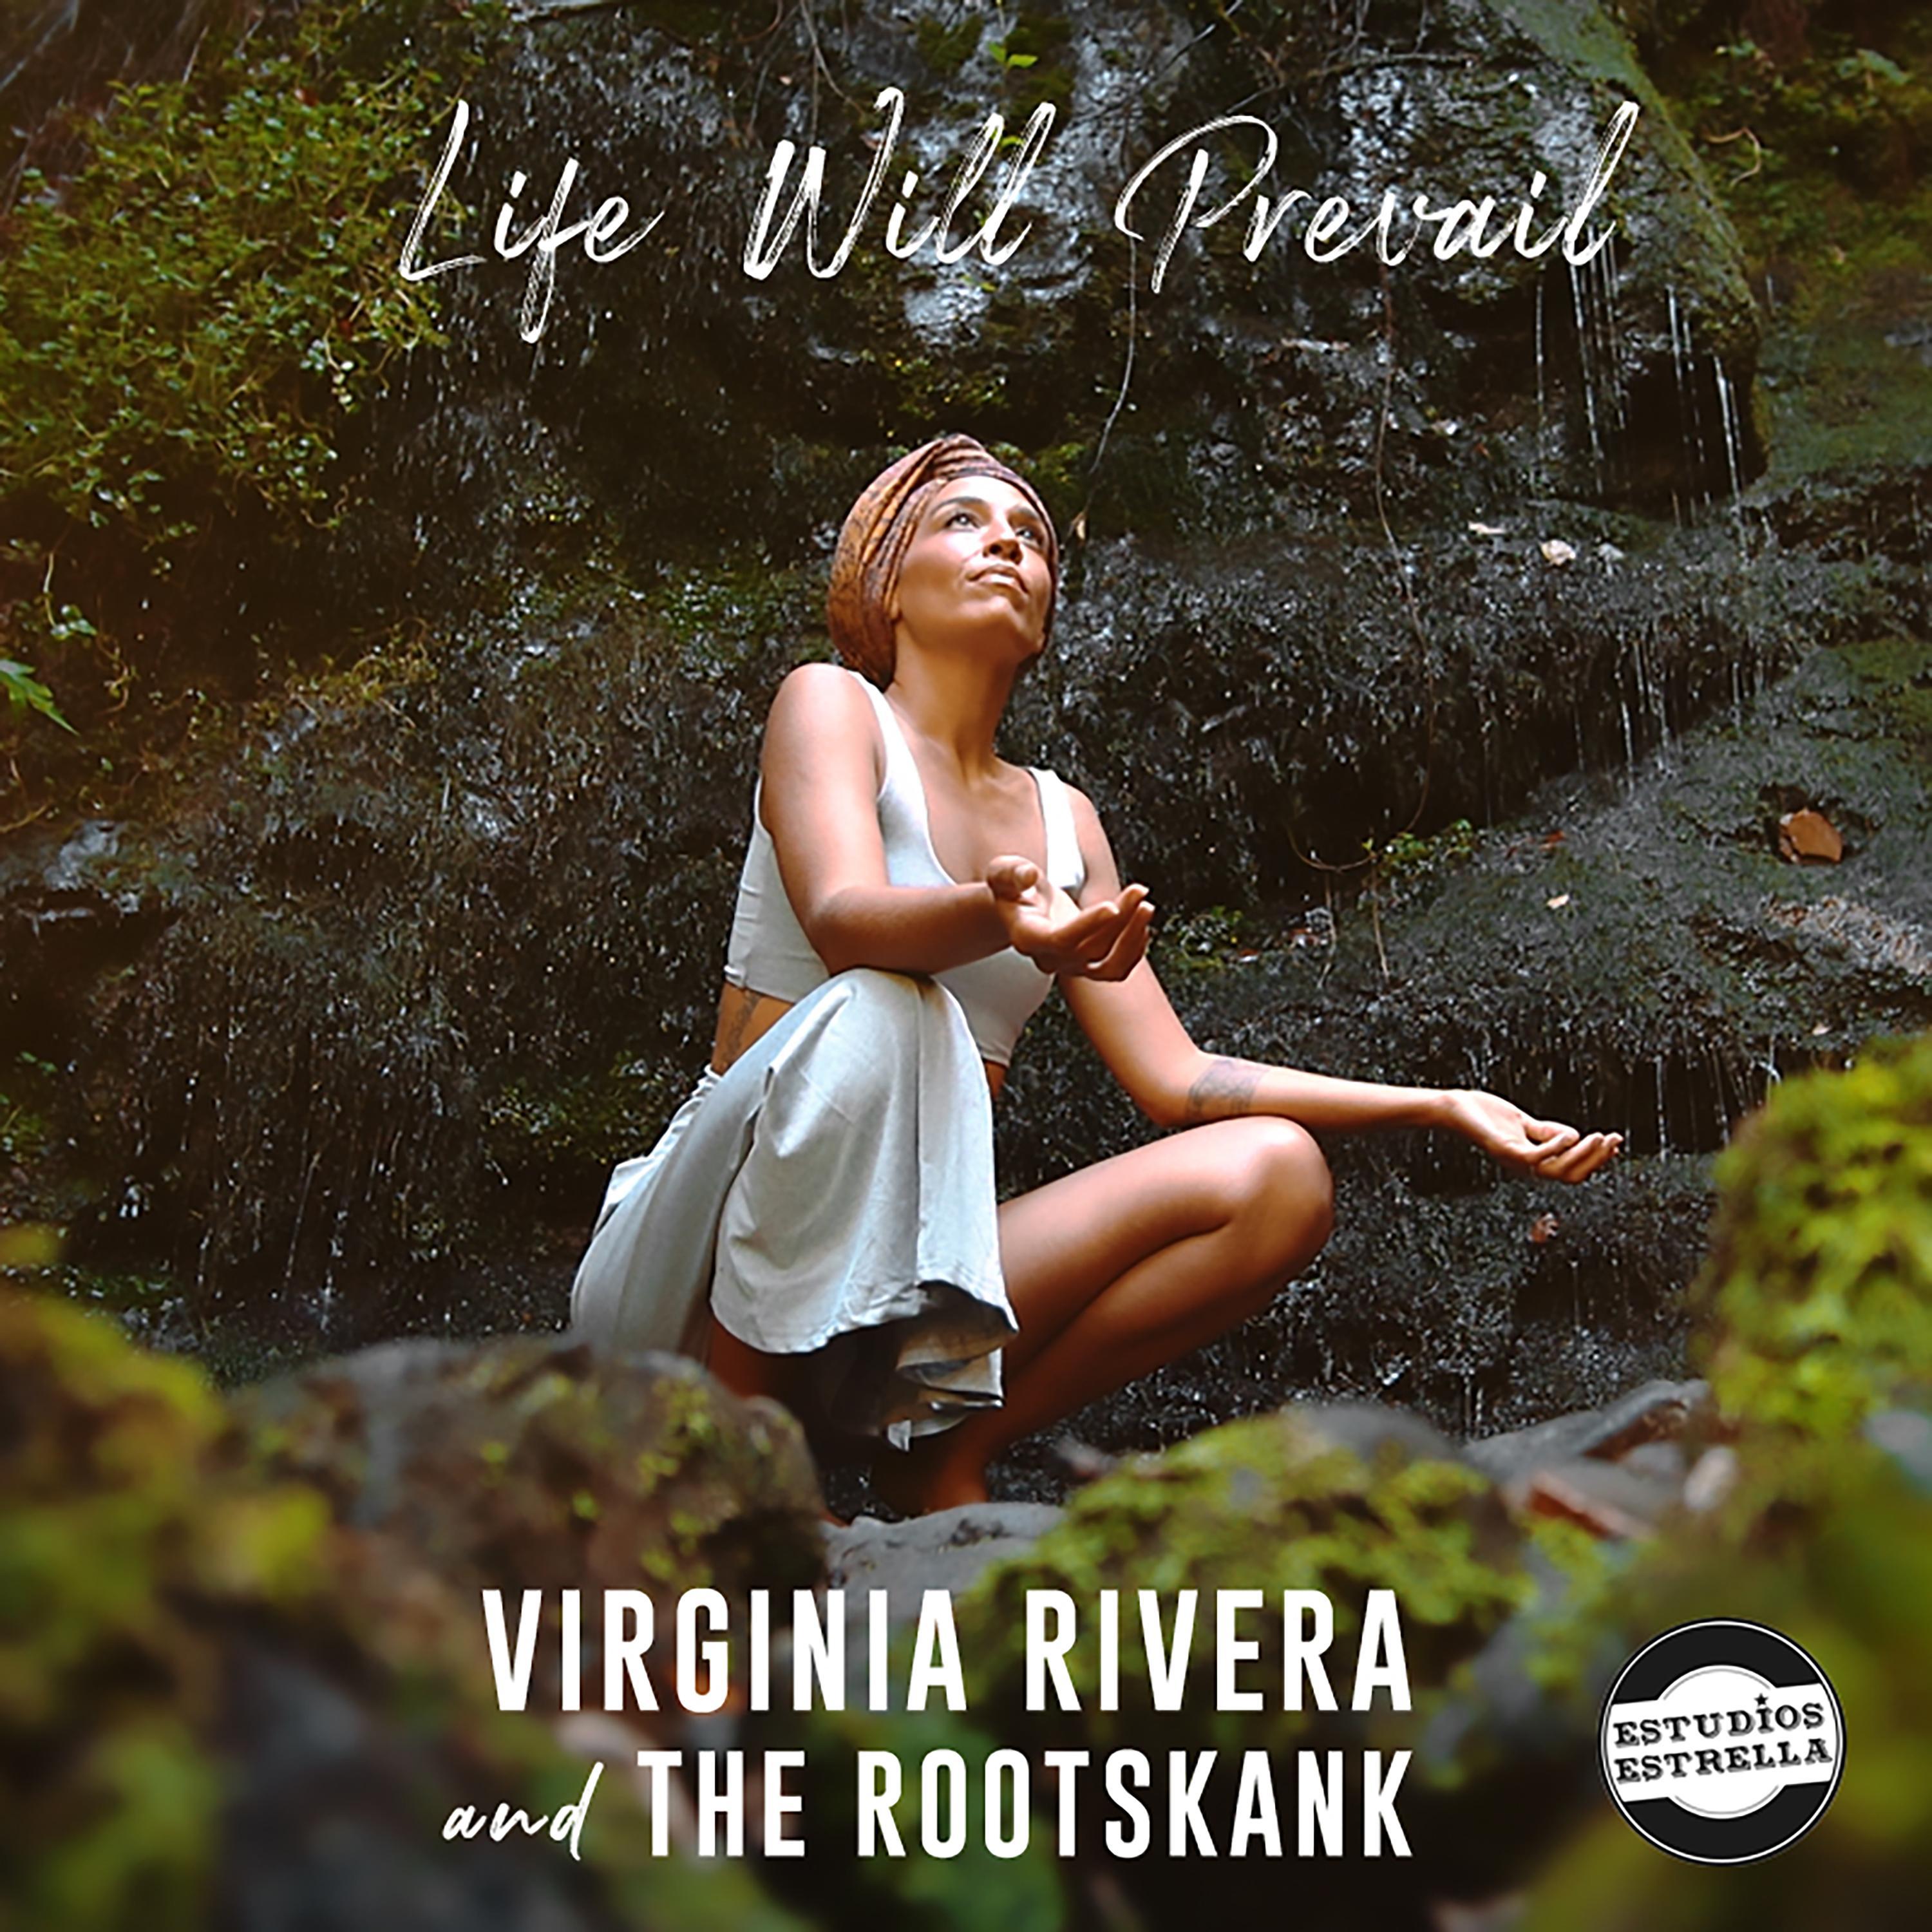 Virginia Rivera - Life will prevail (feat. The Rootskank)